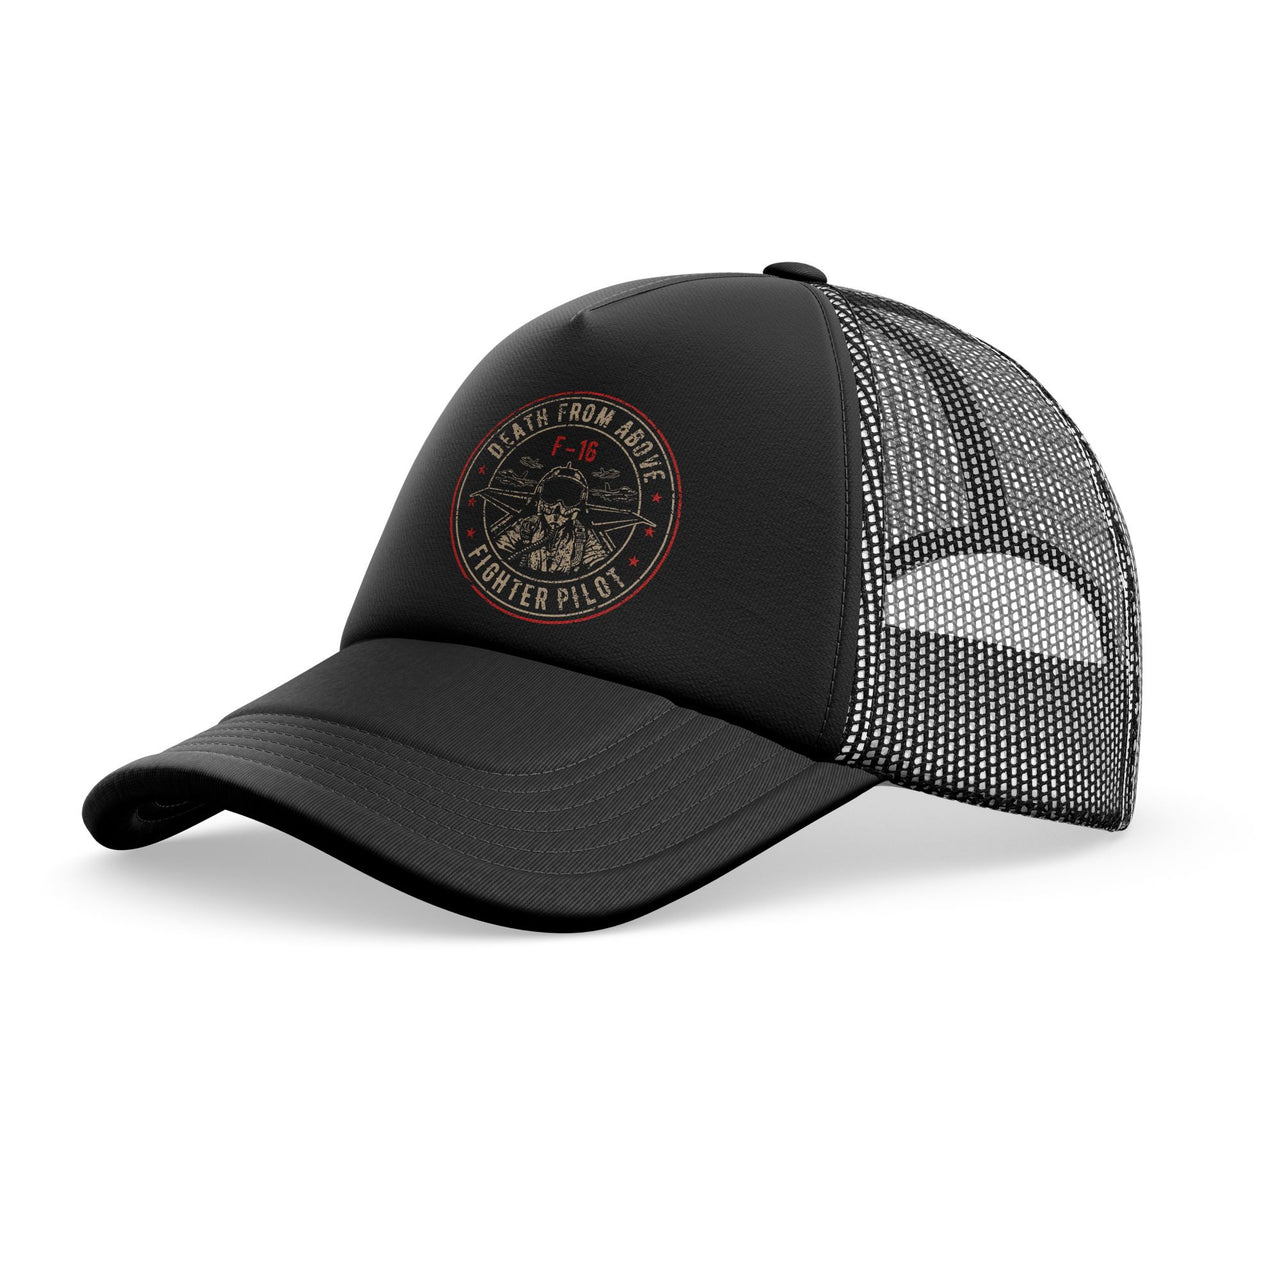 Fighting Falcon F16 - Death From Above Designed Trucker Caps & Hats